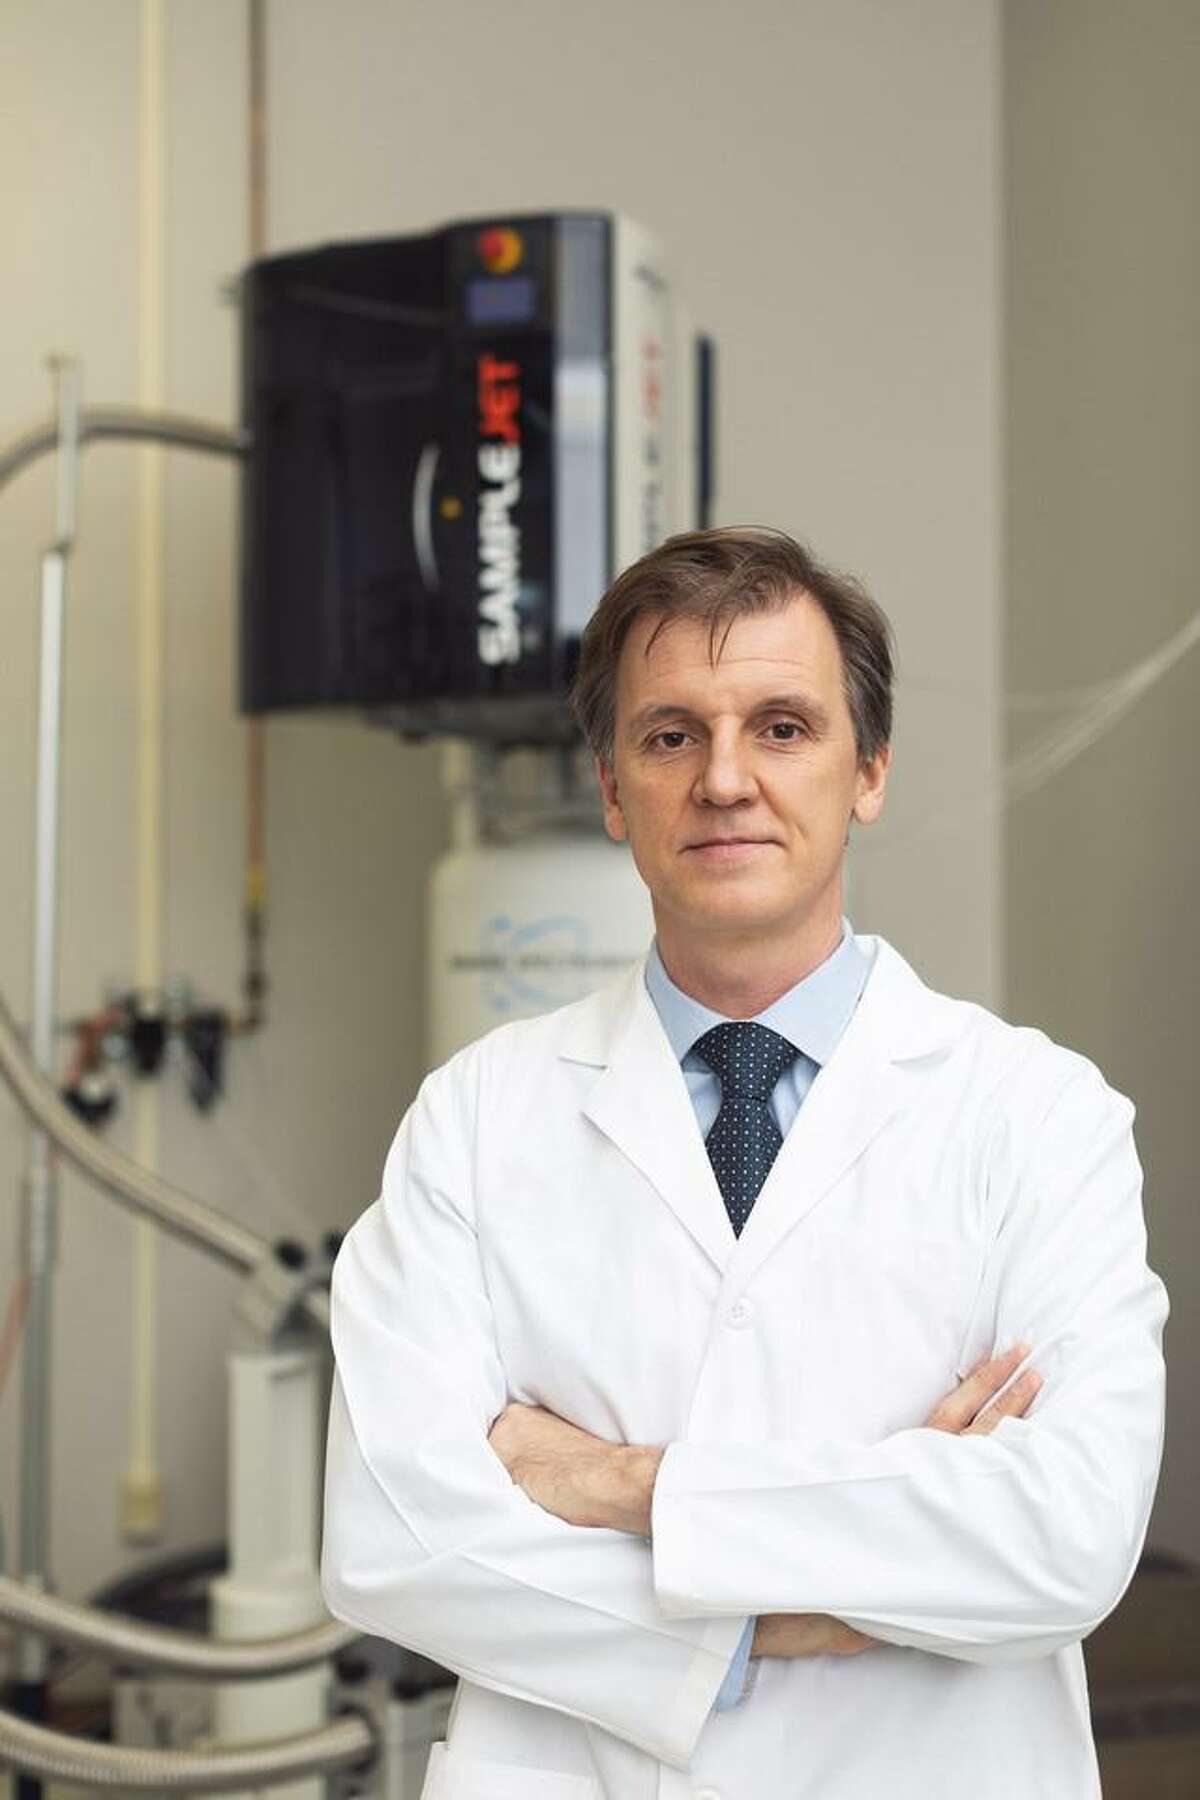 Dmitri Ivanov, an associate professor of biochemistry and structural biology at UT Health San Antonio, is the lead researcher on a project studying COVID-19 funded by the San Antonio Partnership for Precision Therapeutics.